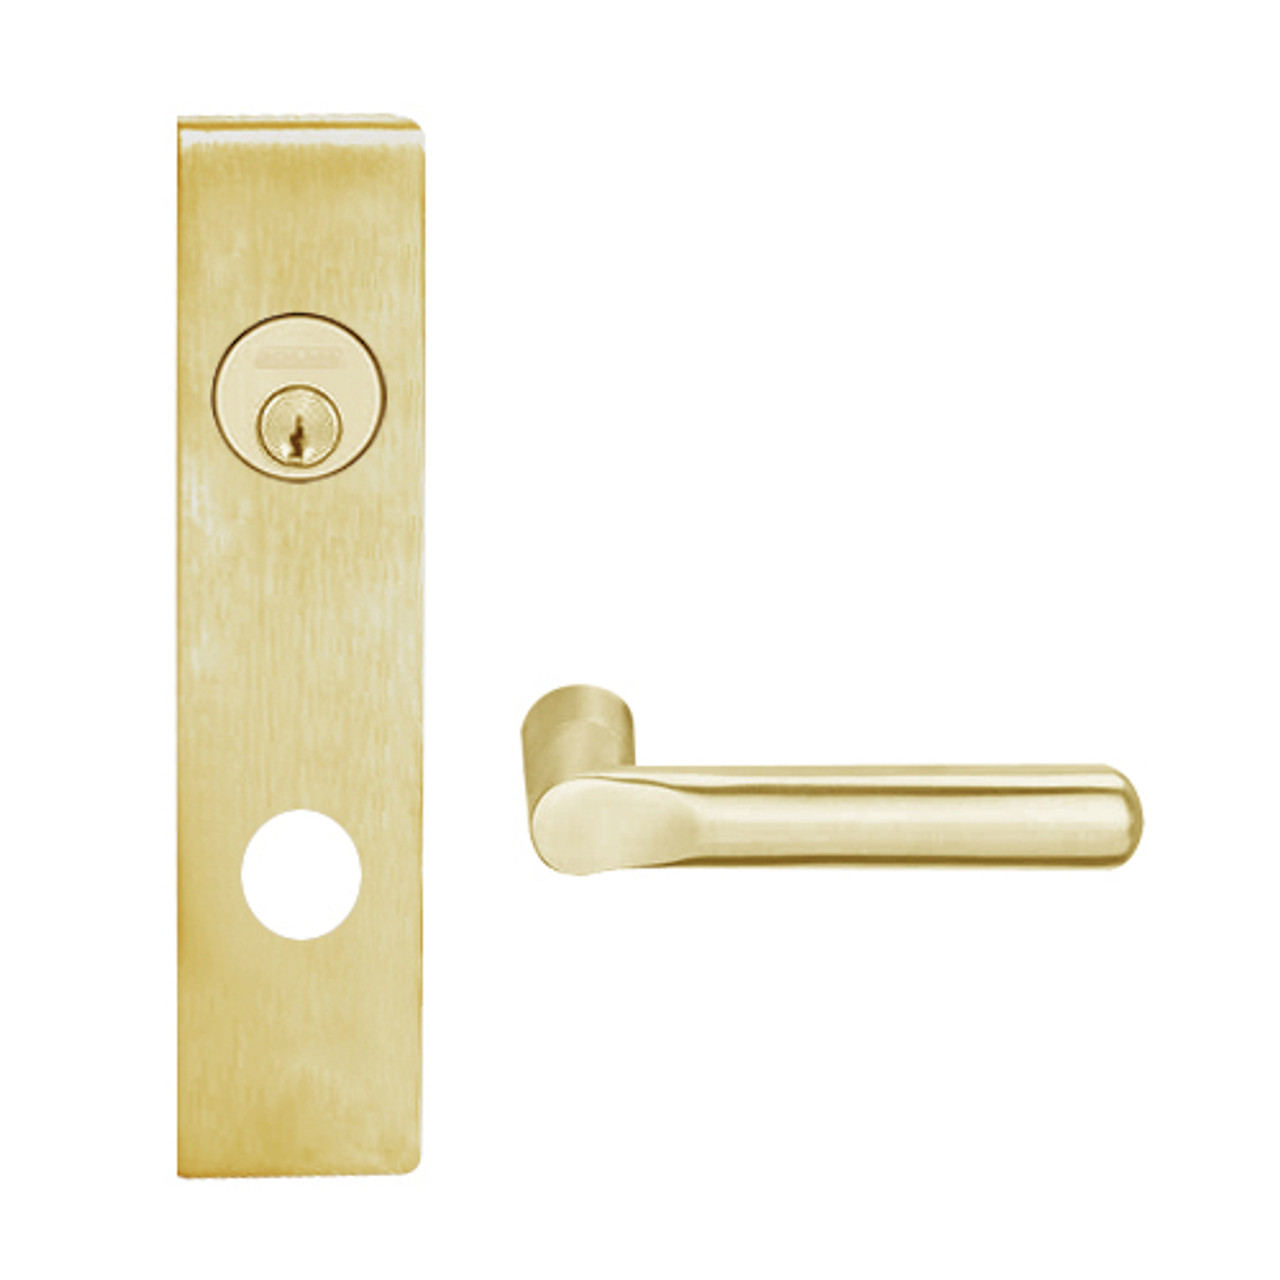 L9080L-18L-606 Schlage L Series Less Cylinder Storeroom Commercial Mortise Lock with 18 Cast Lever Design in Satin Brass